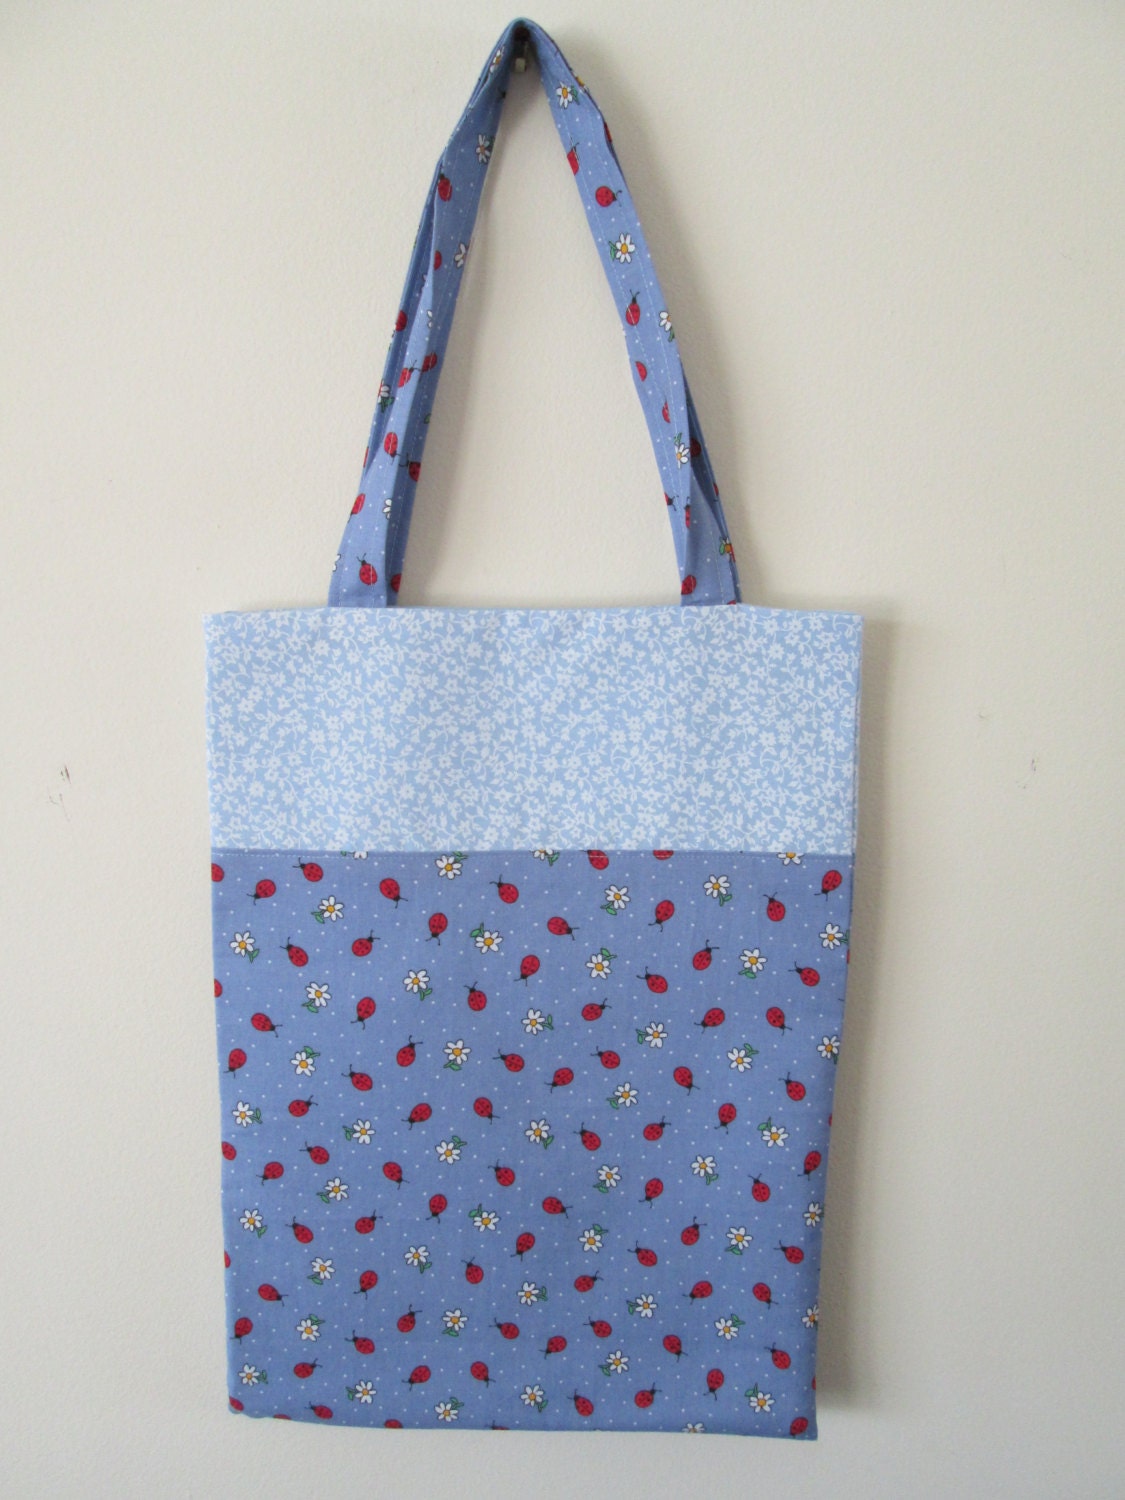 Children's tote bag by JustSeams on Etsy